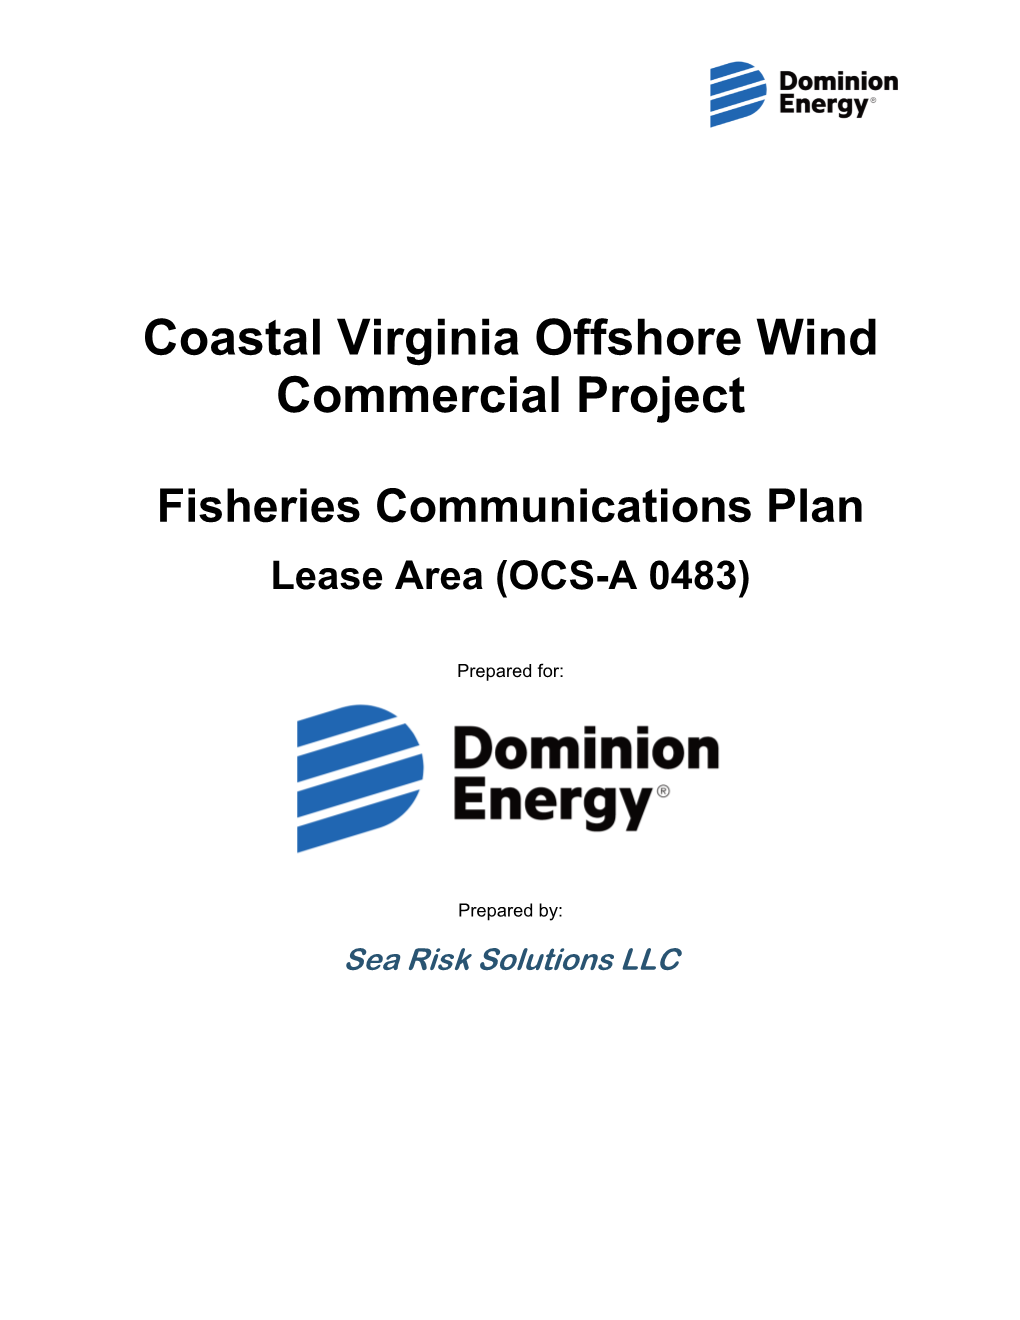 Fisheries Communications Plan Lease Area (OCS-A 0483)